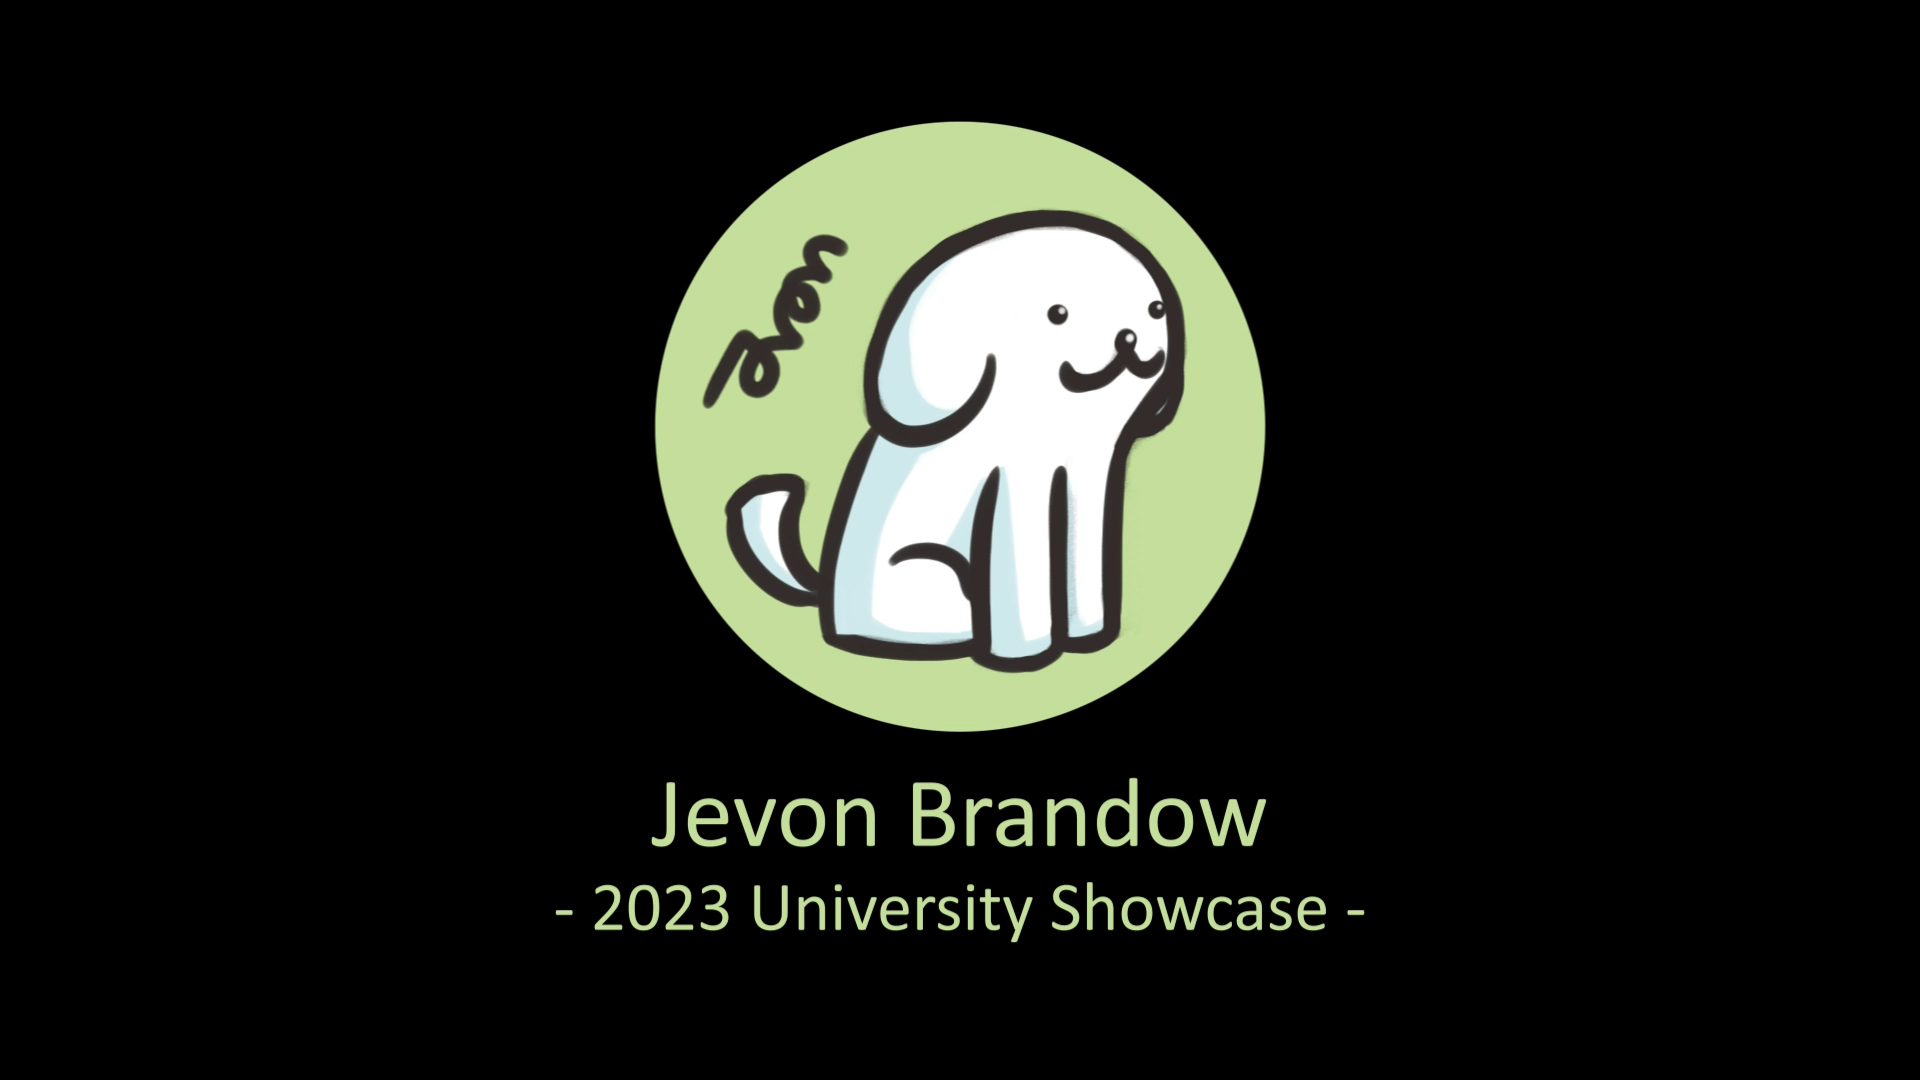 Image link to showreel containing multiple games created by Jevon Brandow, and when applicable; their teammates.